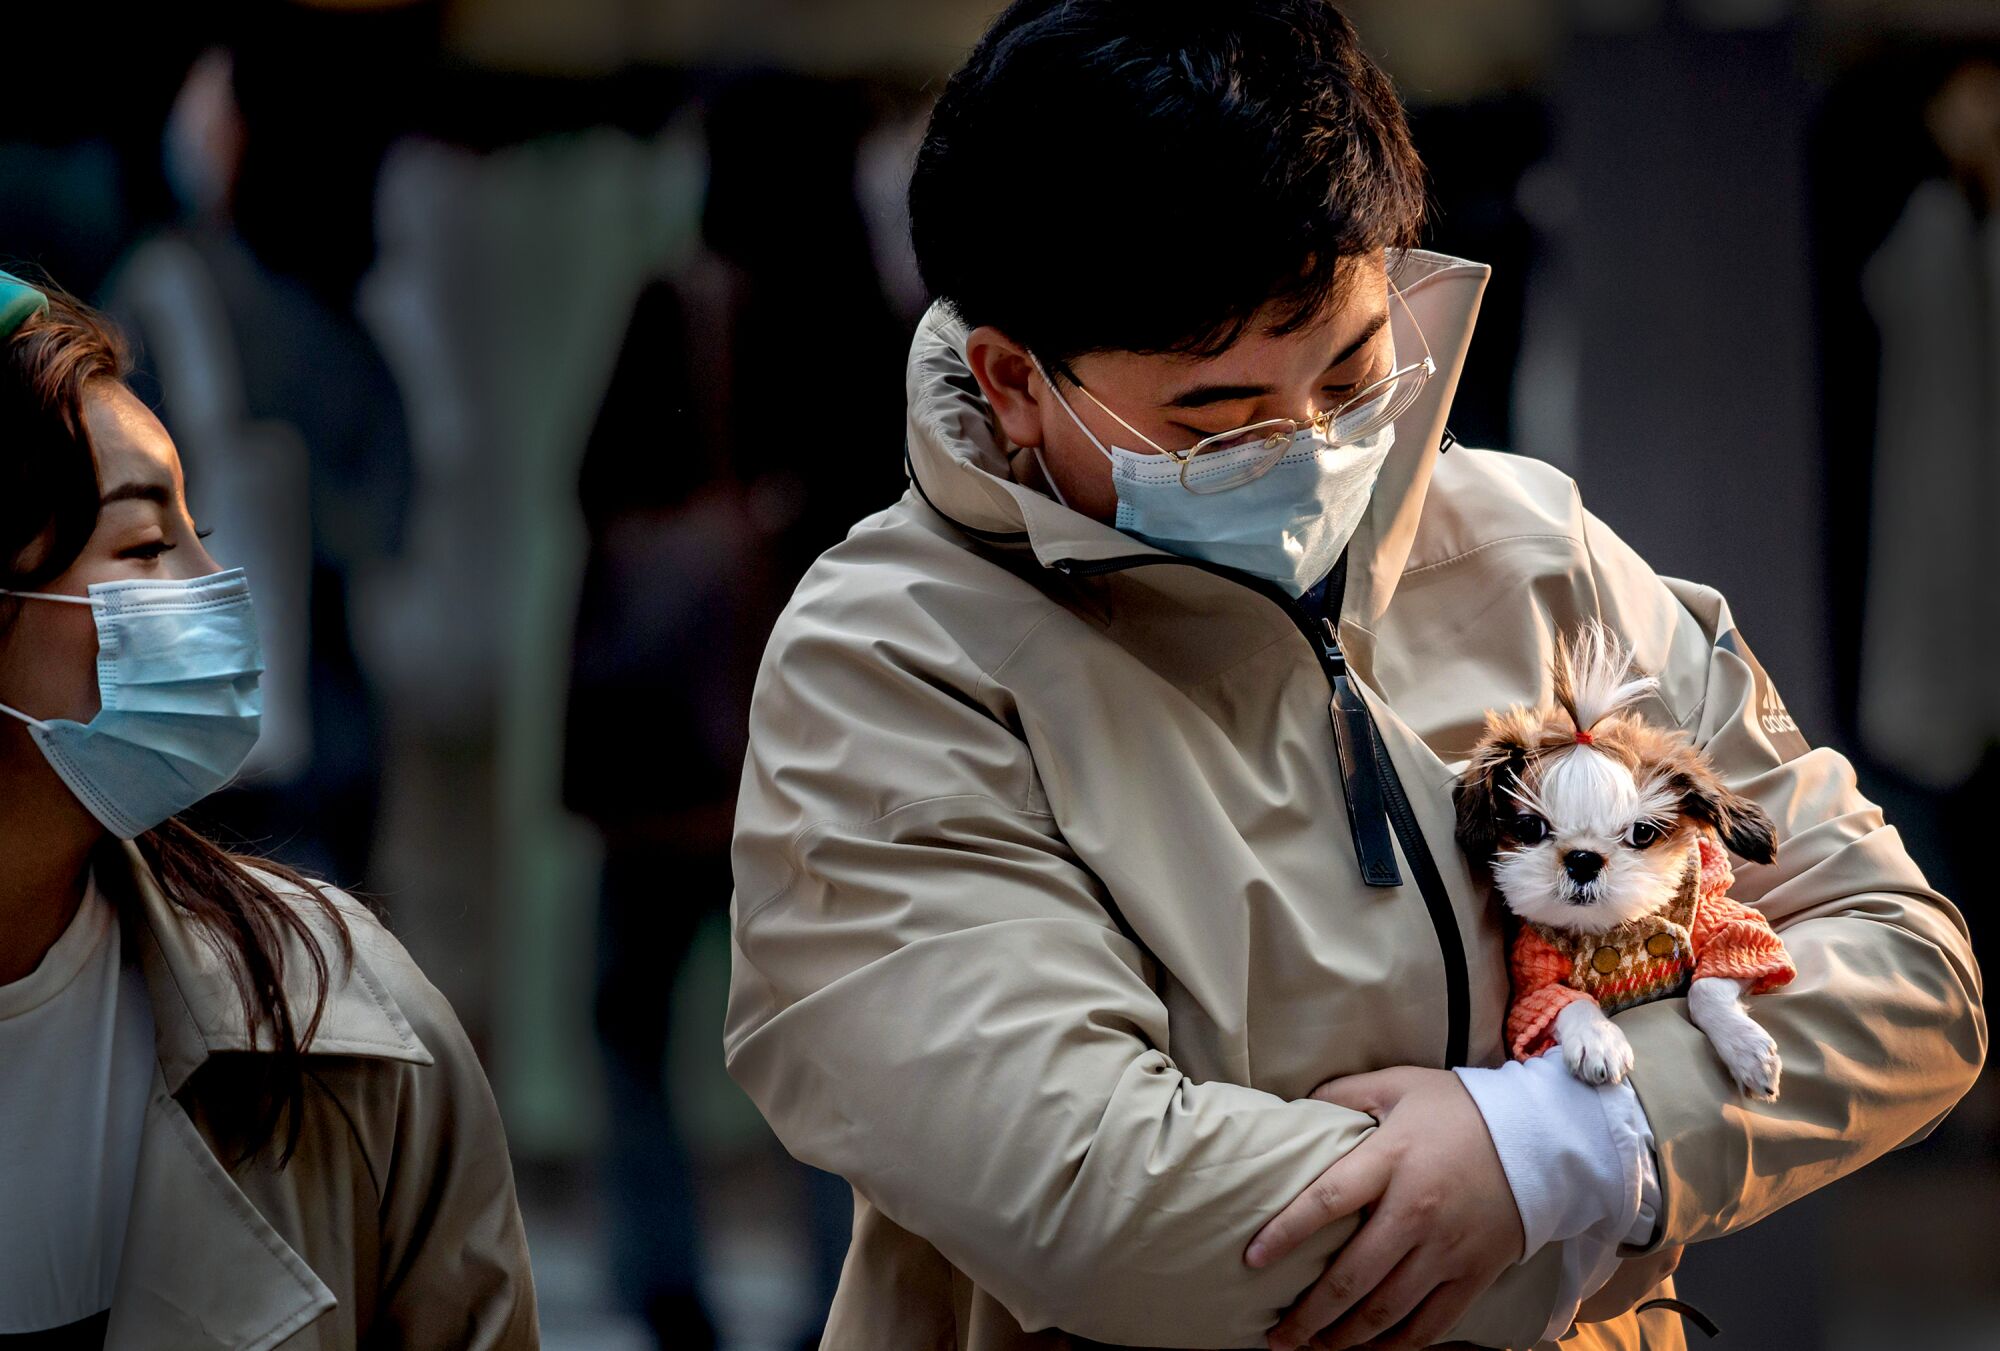 CHINA: A man (R) wearing a facemask amid the concerns over the COVID-19 coronavirus holds a dog as he walks at a shopping mall in Beijing on April 9, 2020.